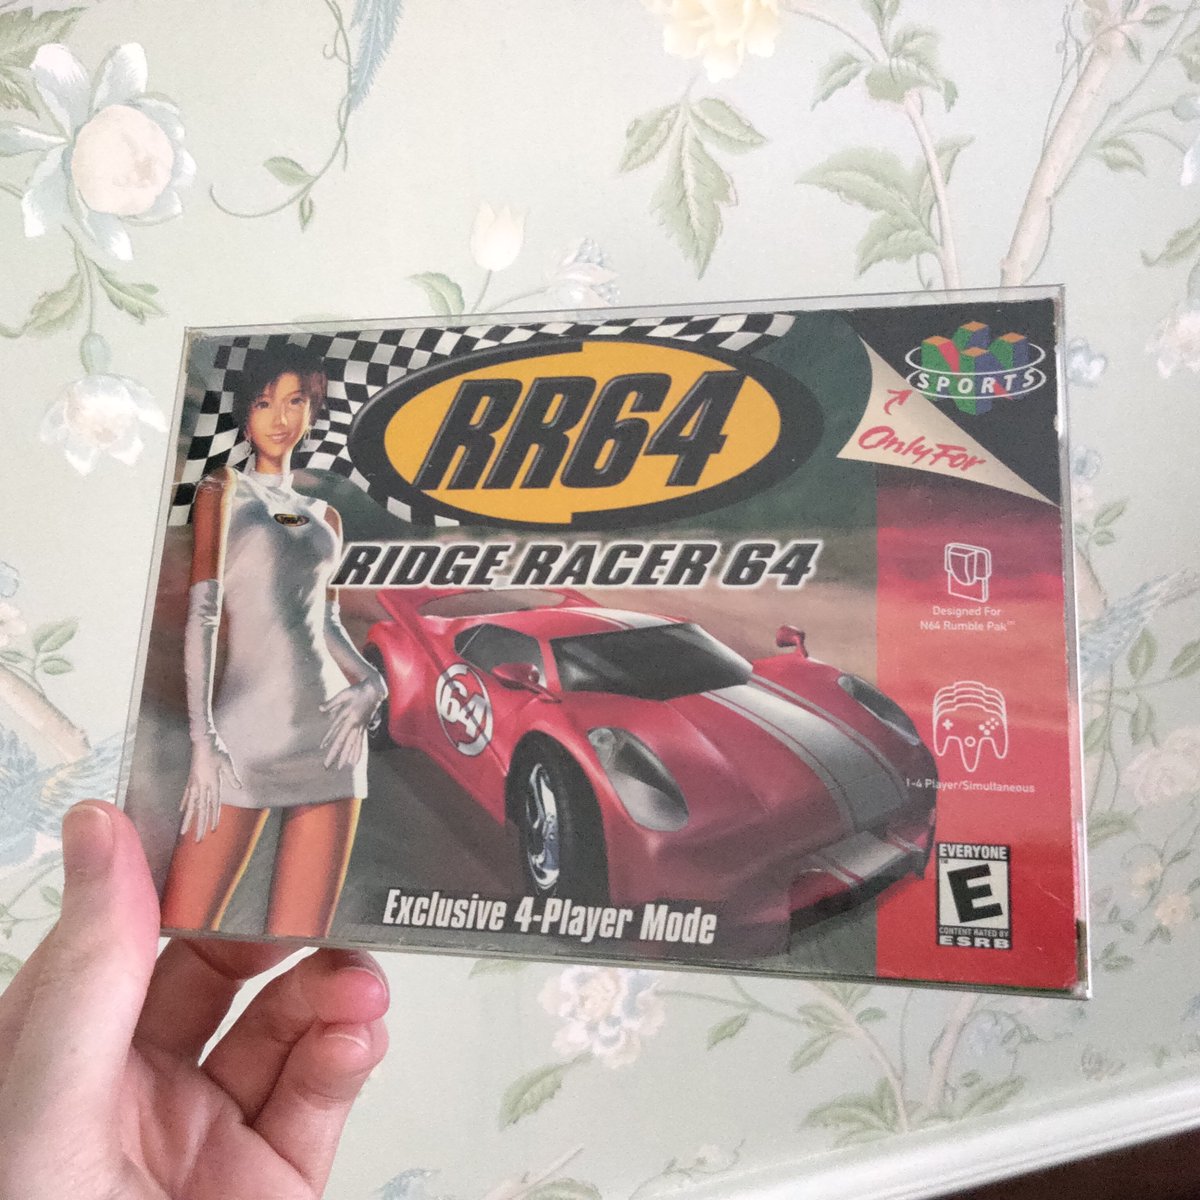 New arrival today to add to my NTSC N64 library. 🏎️

#RetroGaming #N64 #Nintendo64 #Namco #RidgeRacer